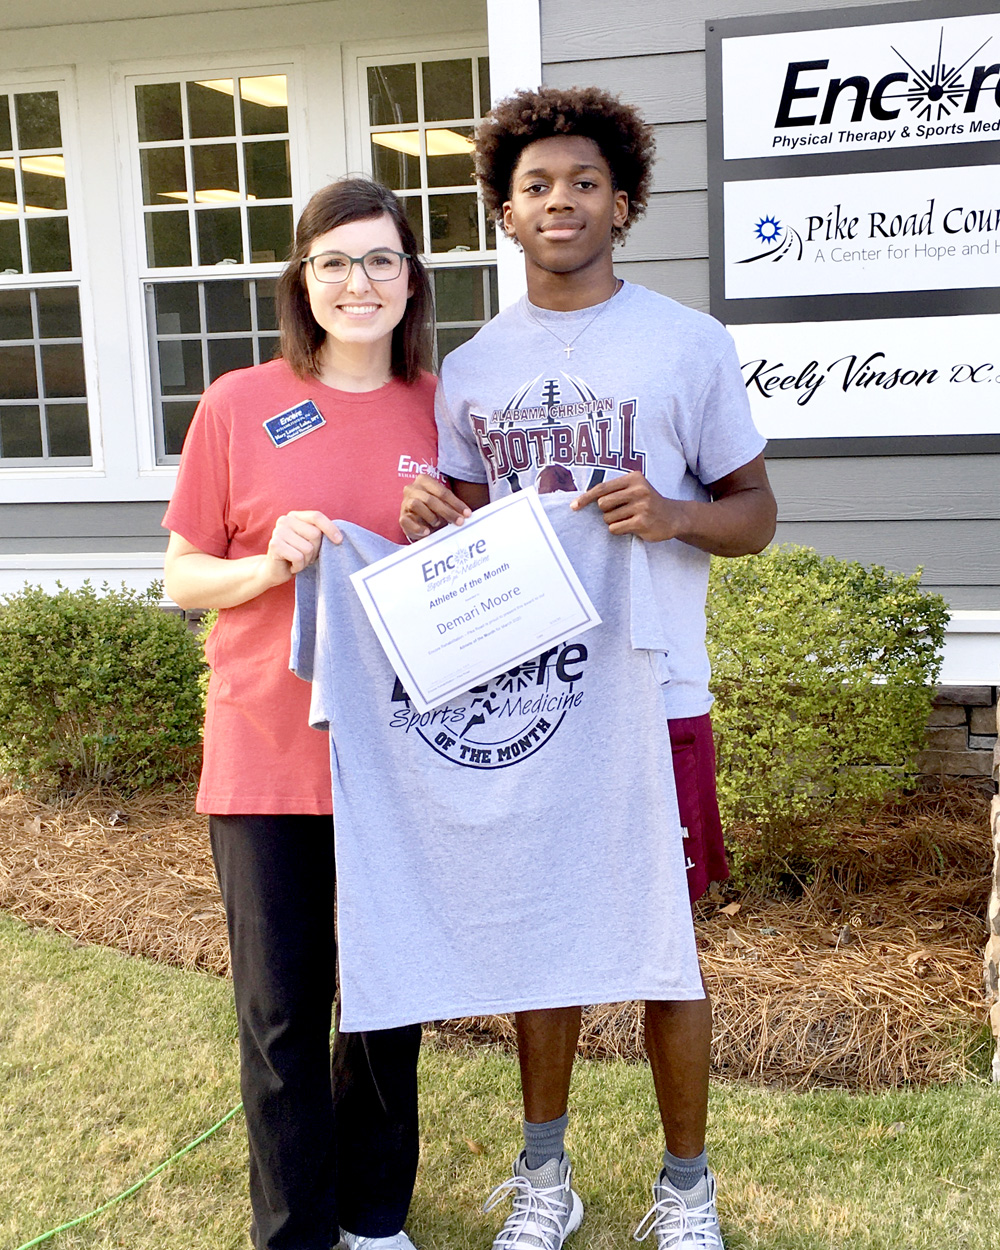 Demari Moore is Athlete of the Month for #EncoreRehab Pike Road